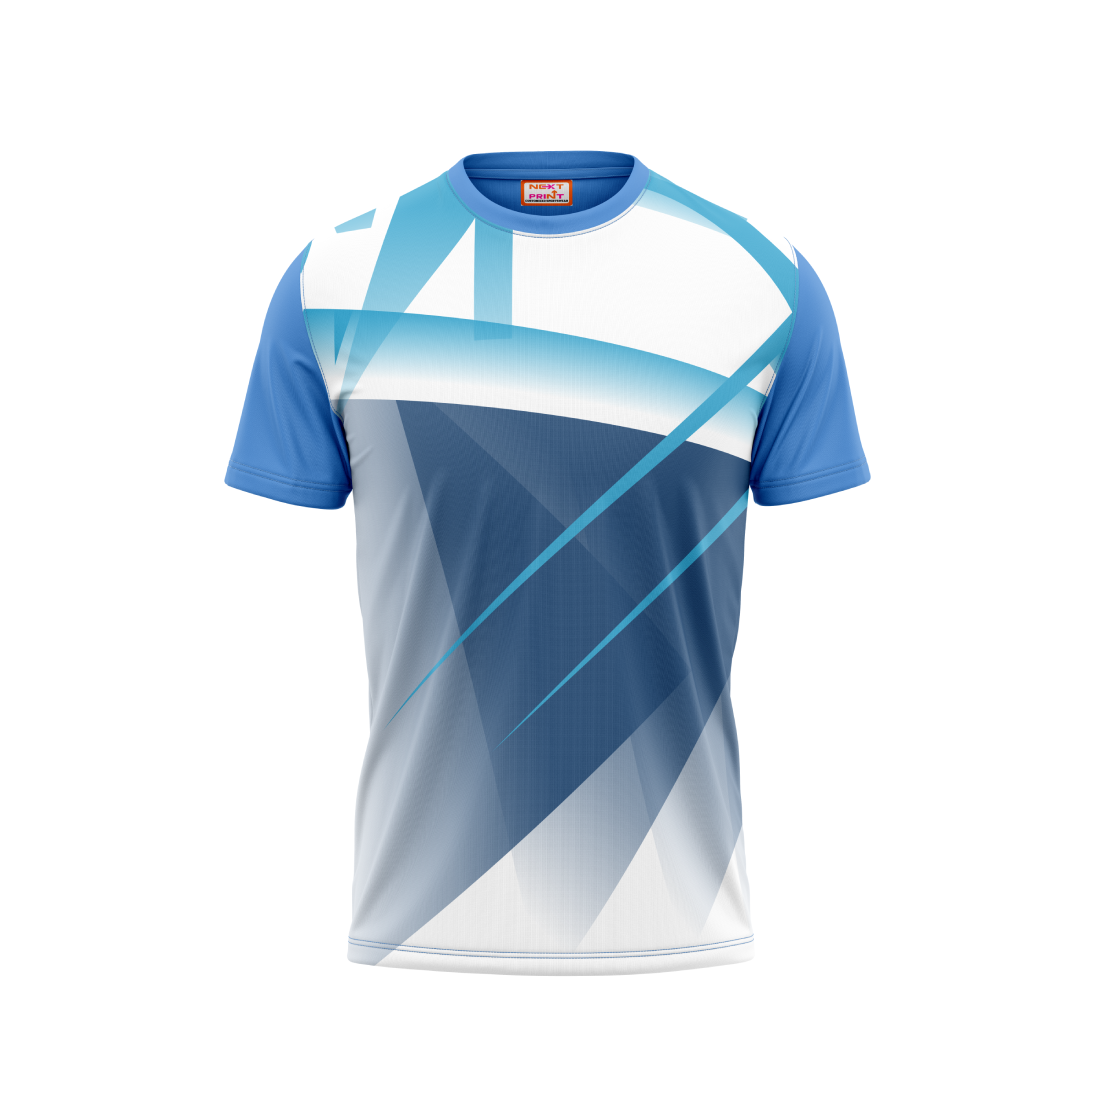 Round Neck Printed Jersey Skyblue NP5000022